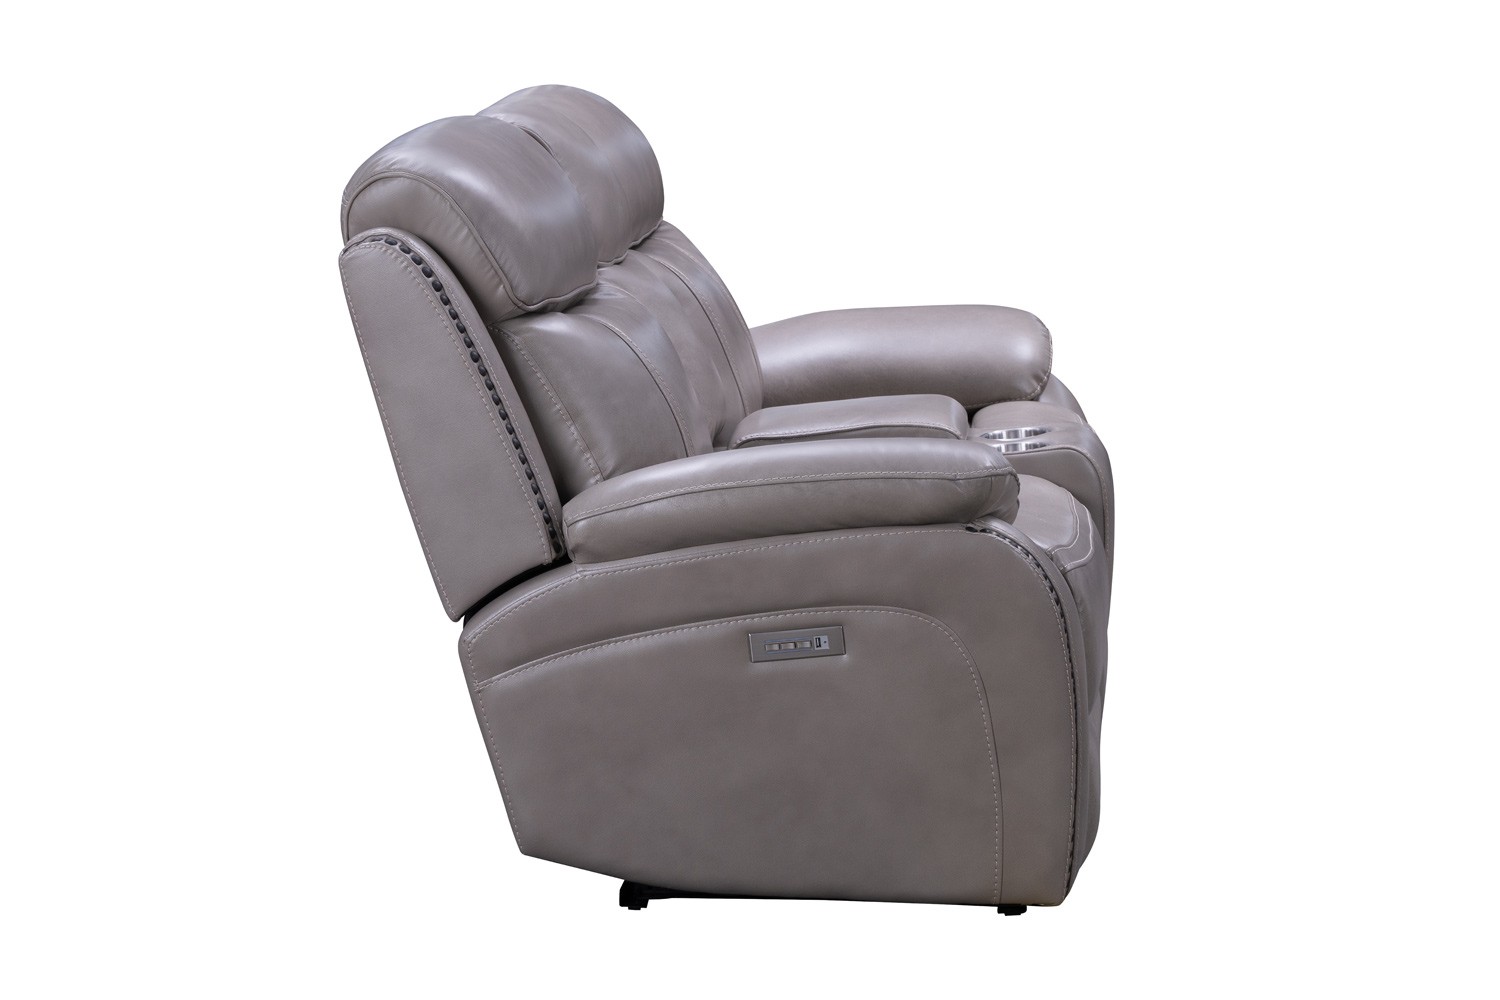 Barcalounger Sandover Power Reclining Console Loveseat with Power Head Rests and Lumbar - Sergi Gray Beige/Leather Match